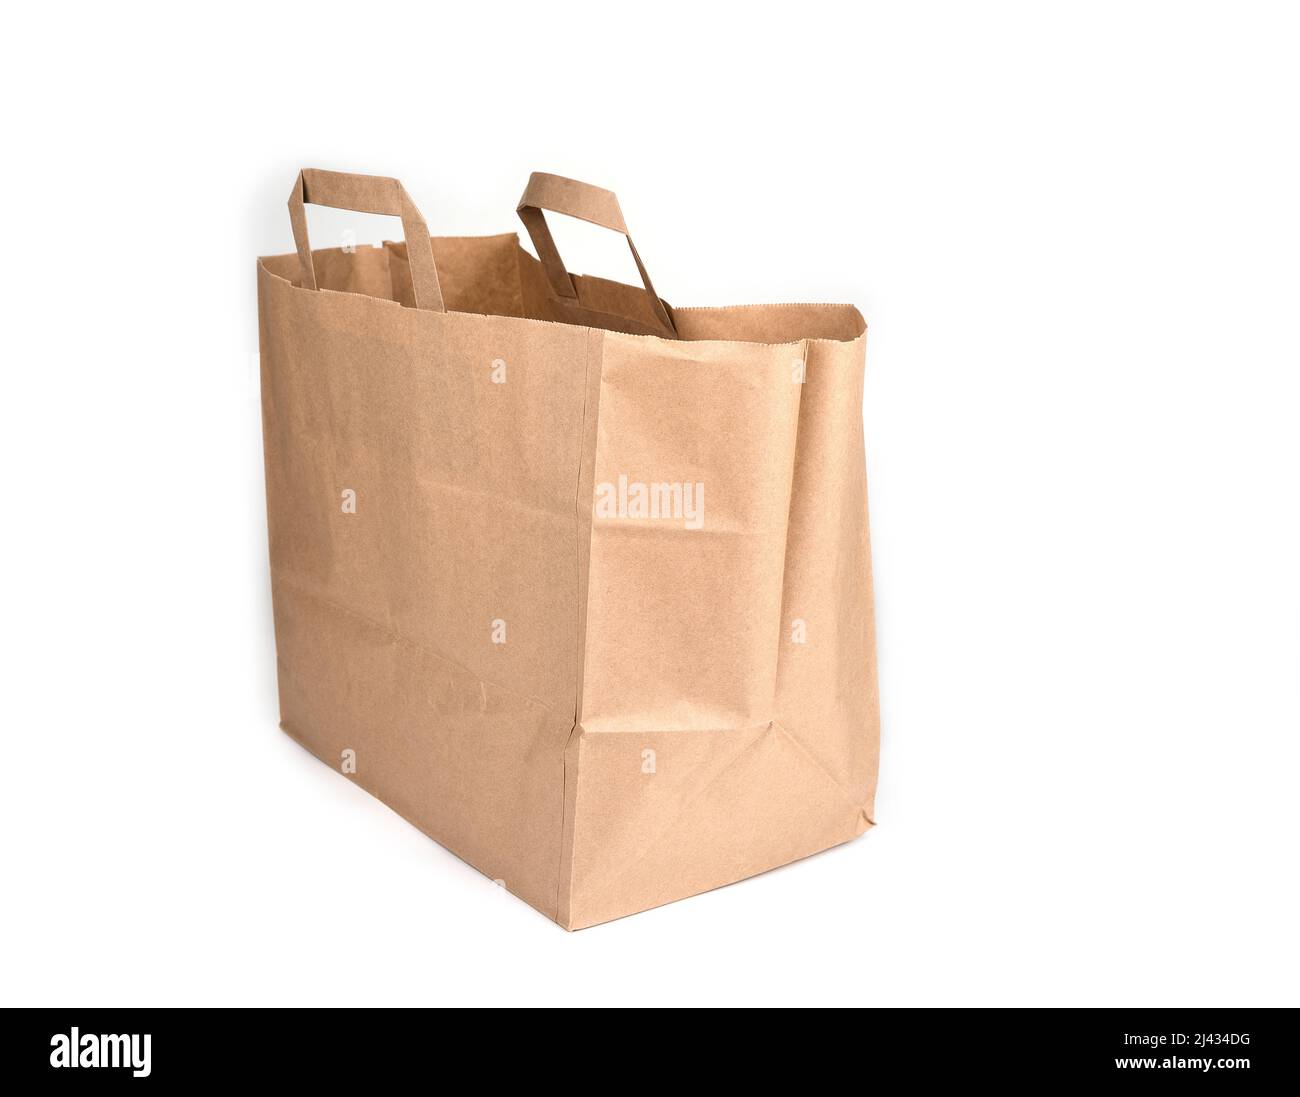 Empty Kraft paper bag on a white. Eco friendly packaging concept. Stock Photo